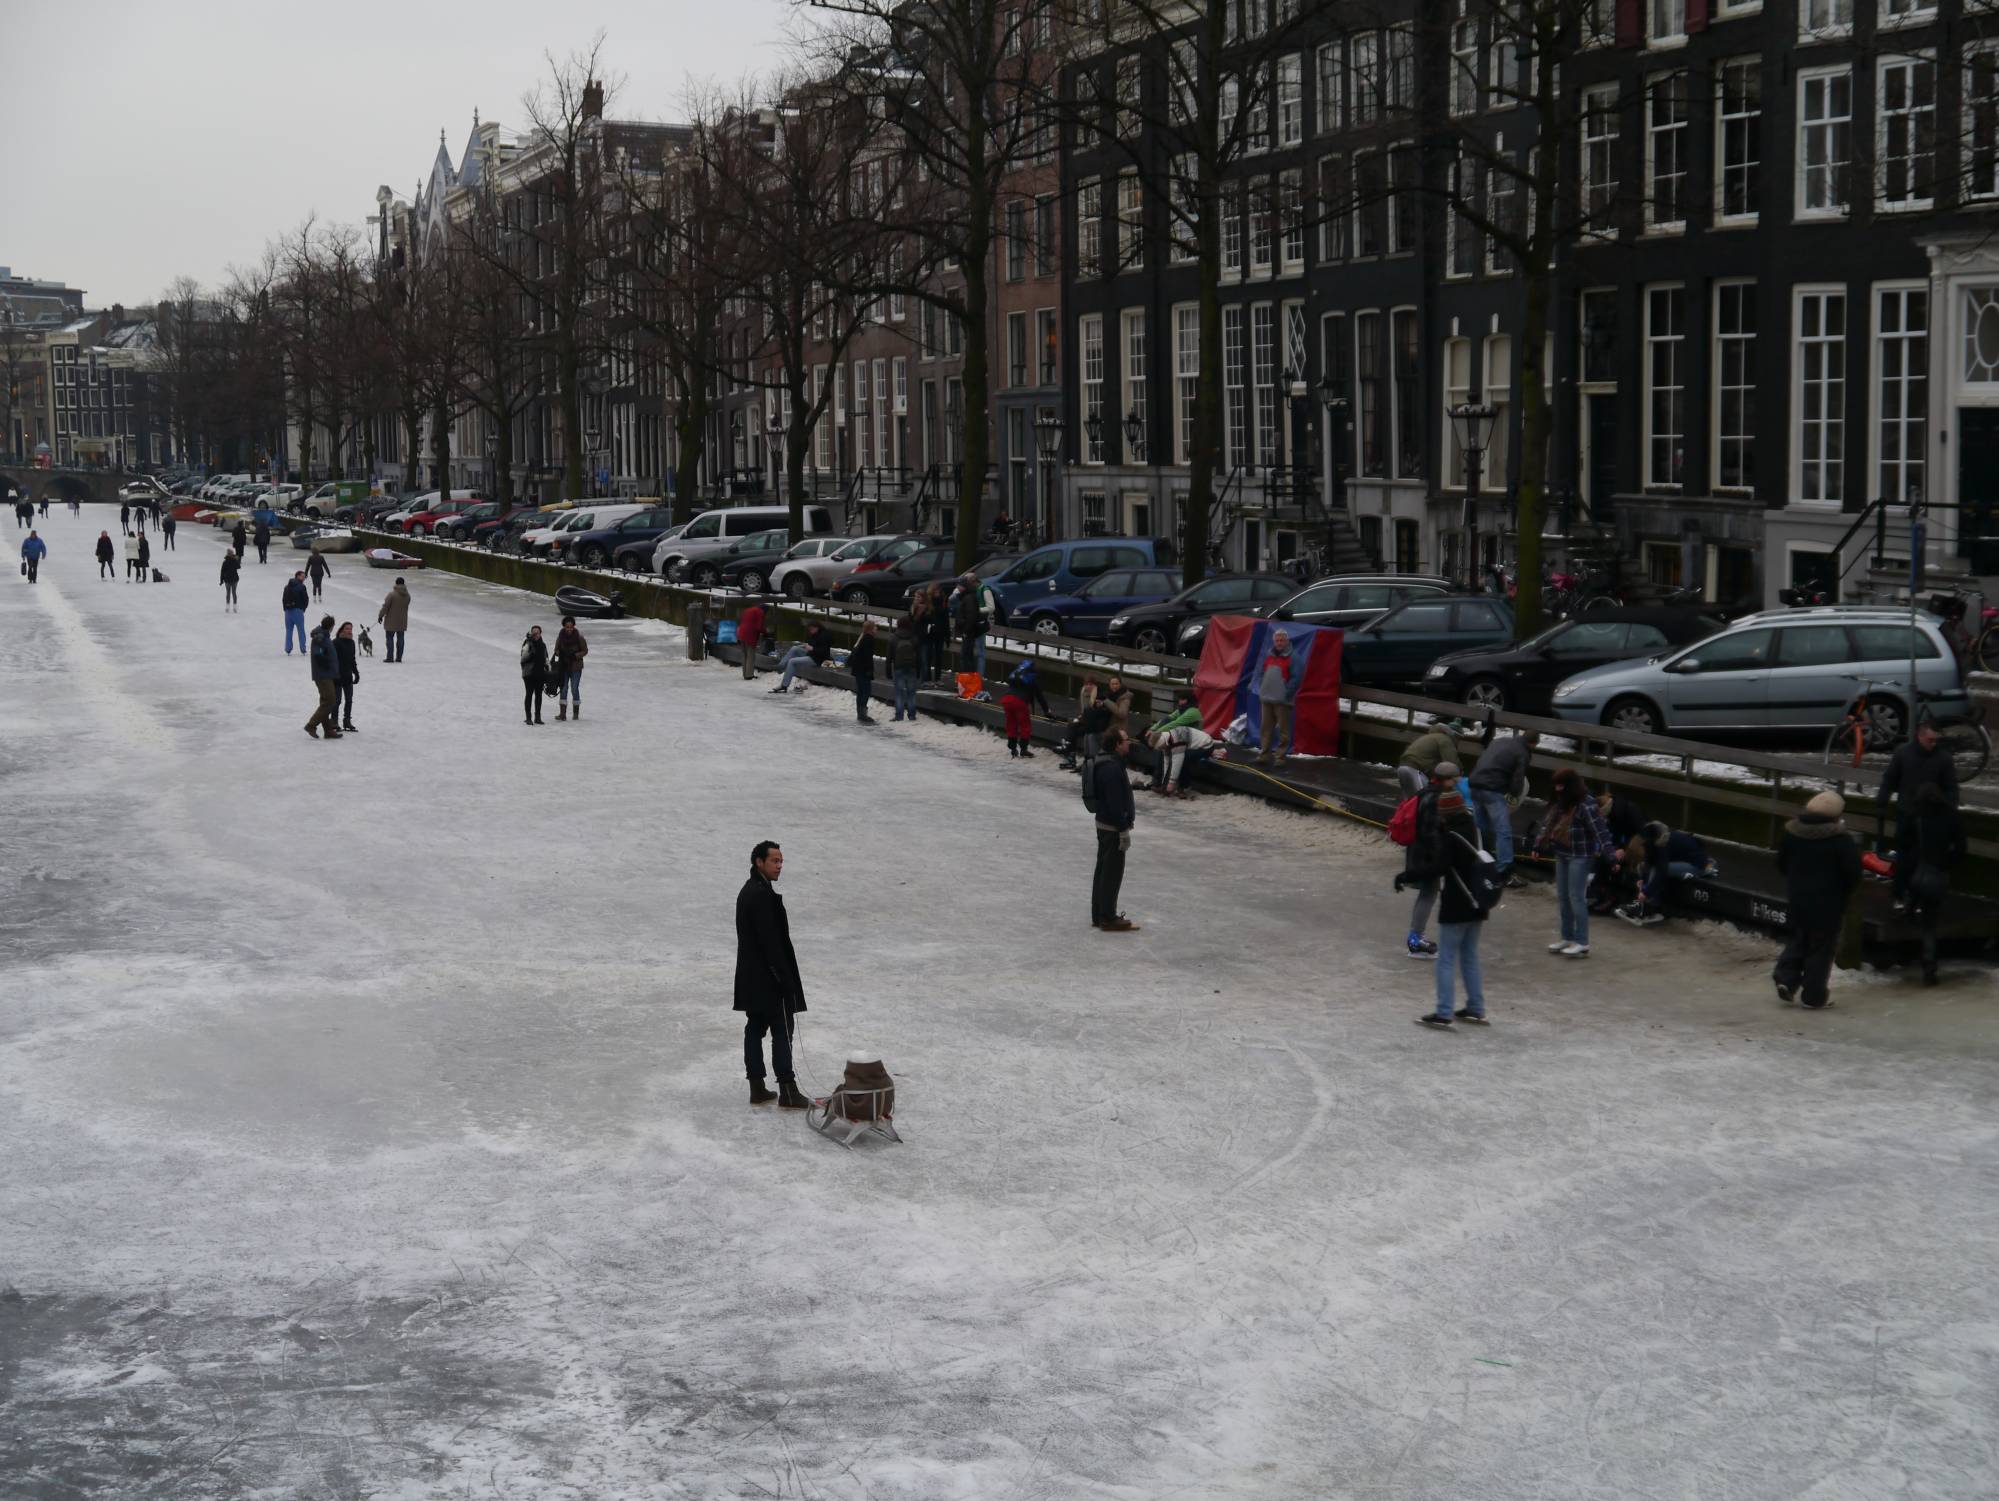 Amsterdam - skaters on canal